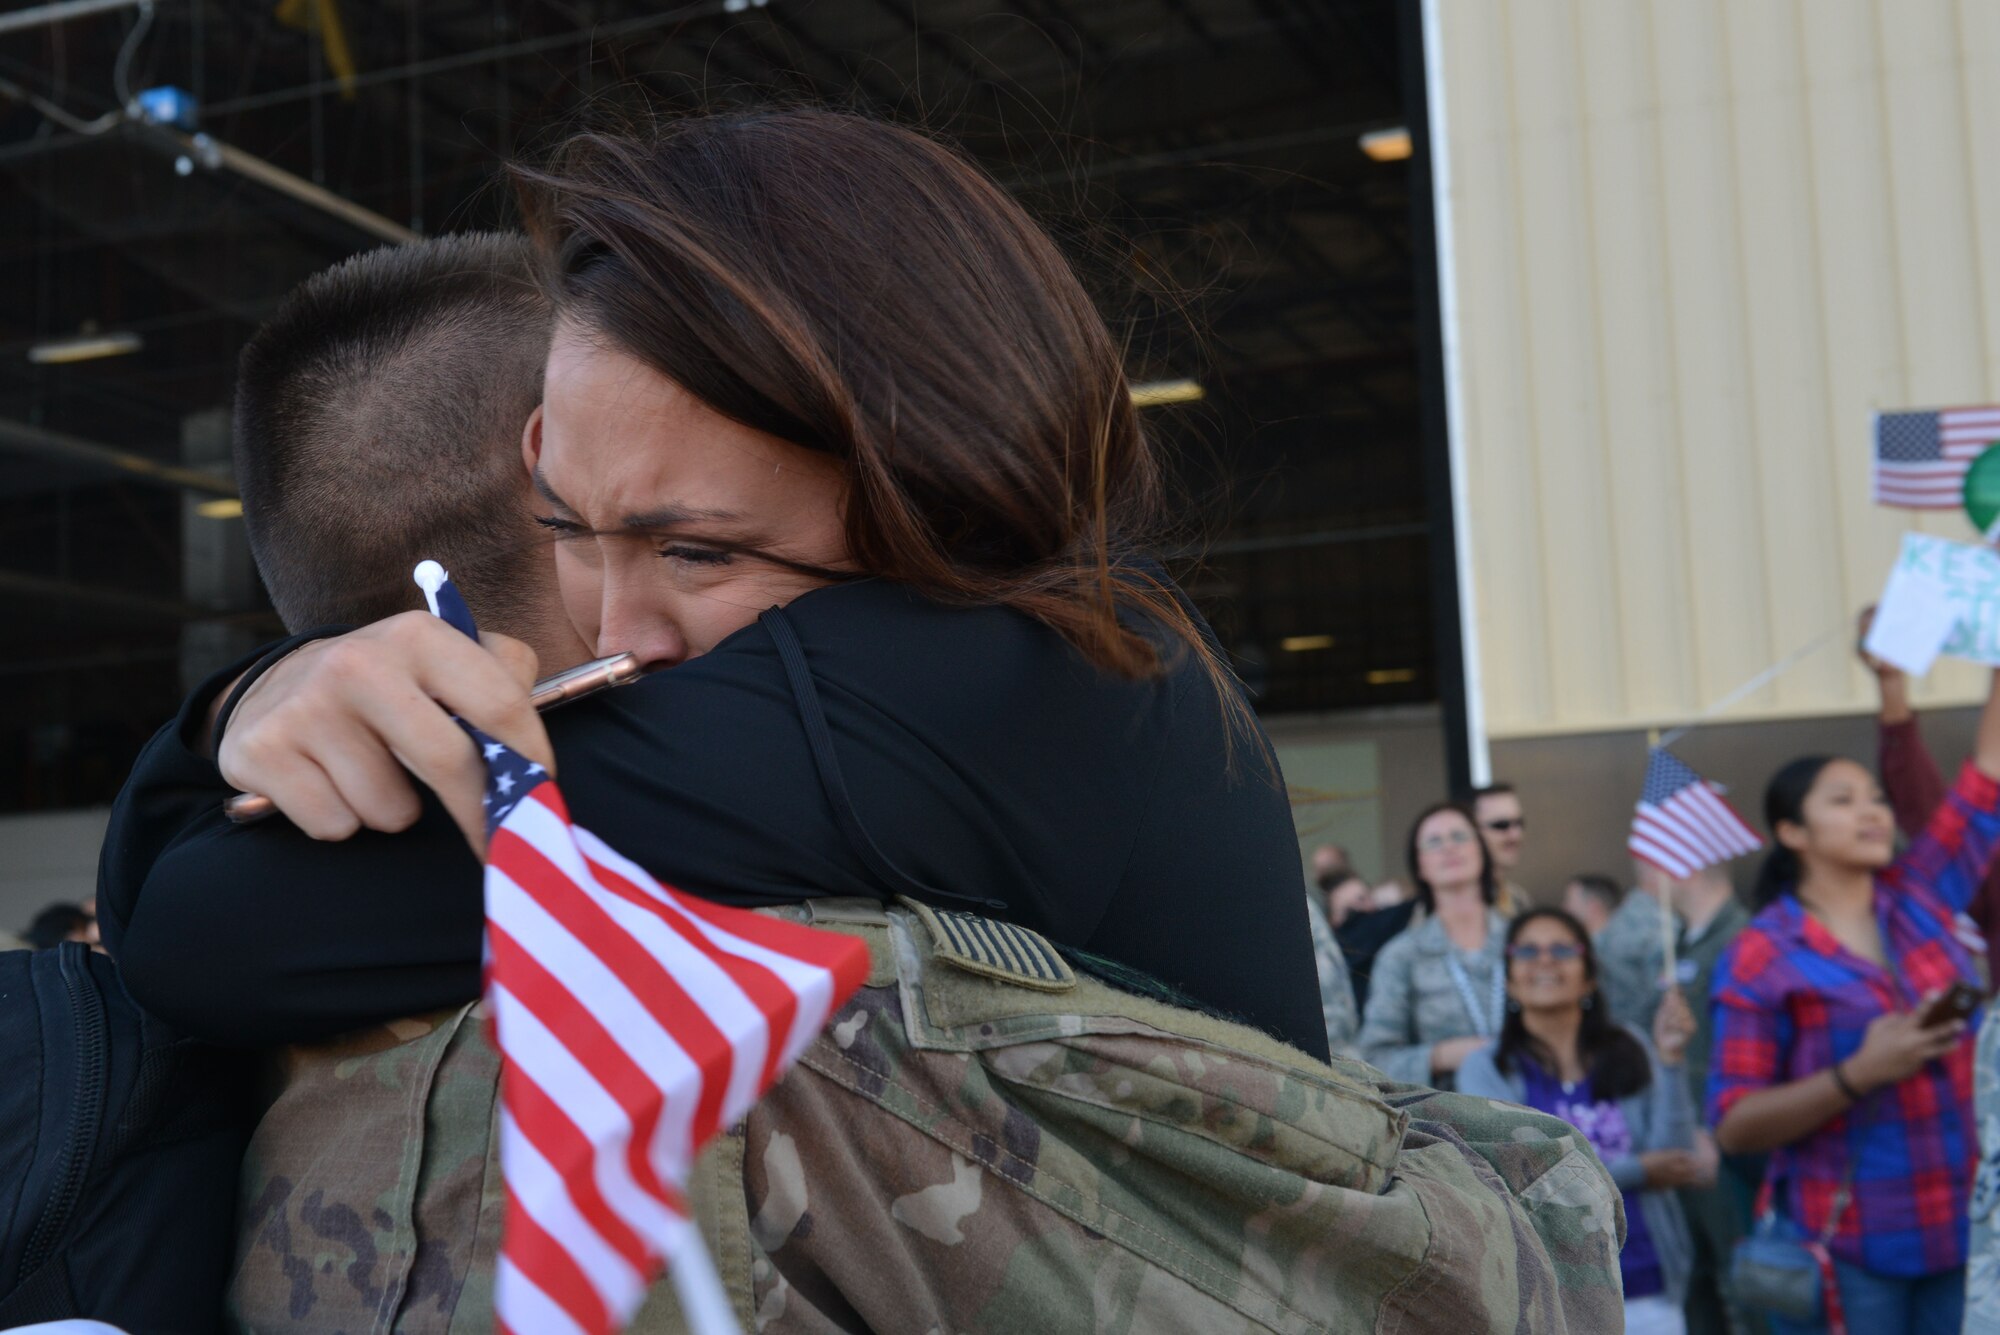 A U.S. Airman assigned to the 20th Fighter Wing hugs a family member after returning to Shaw Air Force Base, S.C., May 5, 2017. Airmen returned after a six-month deployment to the United States Central Command area of responsibility. (U.S. Air Force photo by Airman 1st Class Destinee Sweeney)